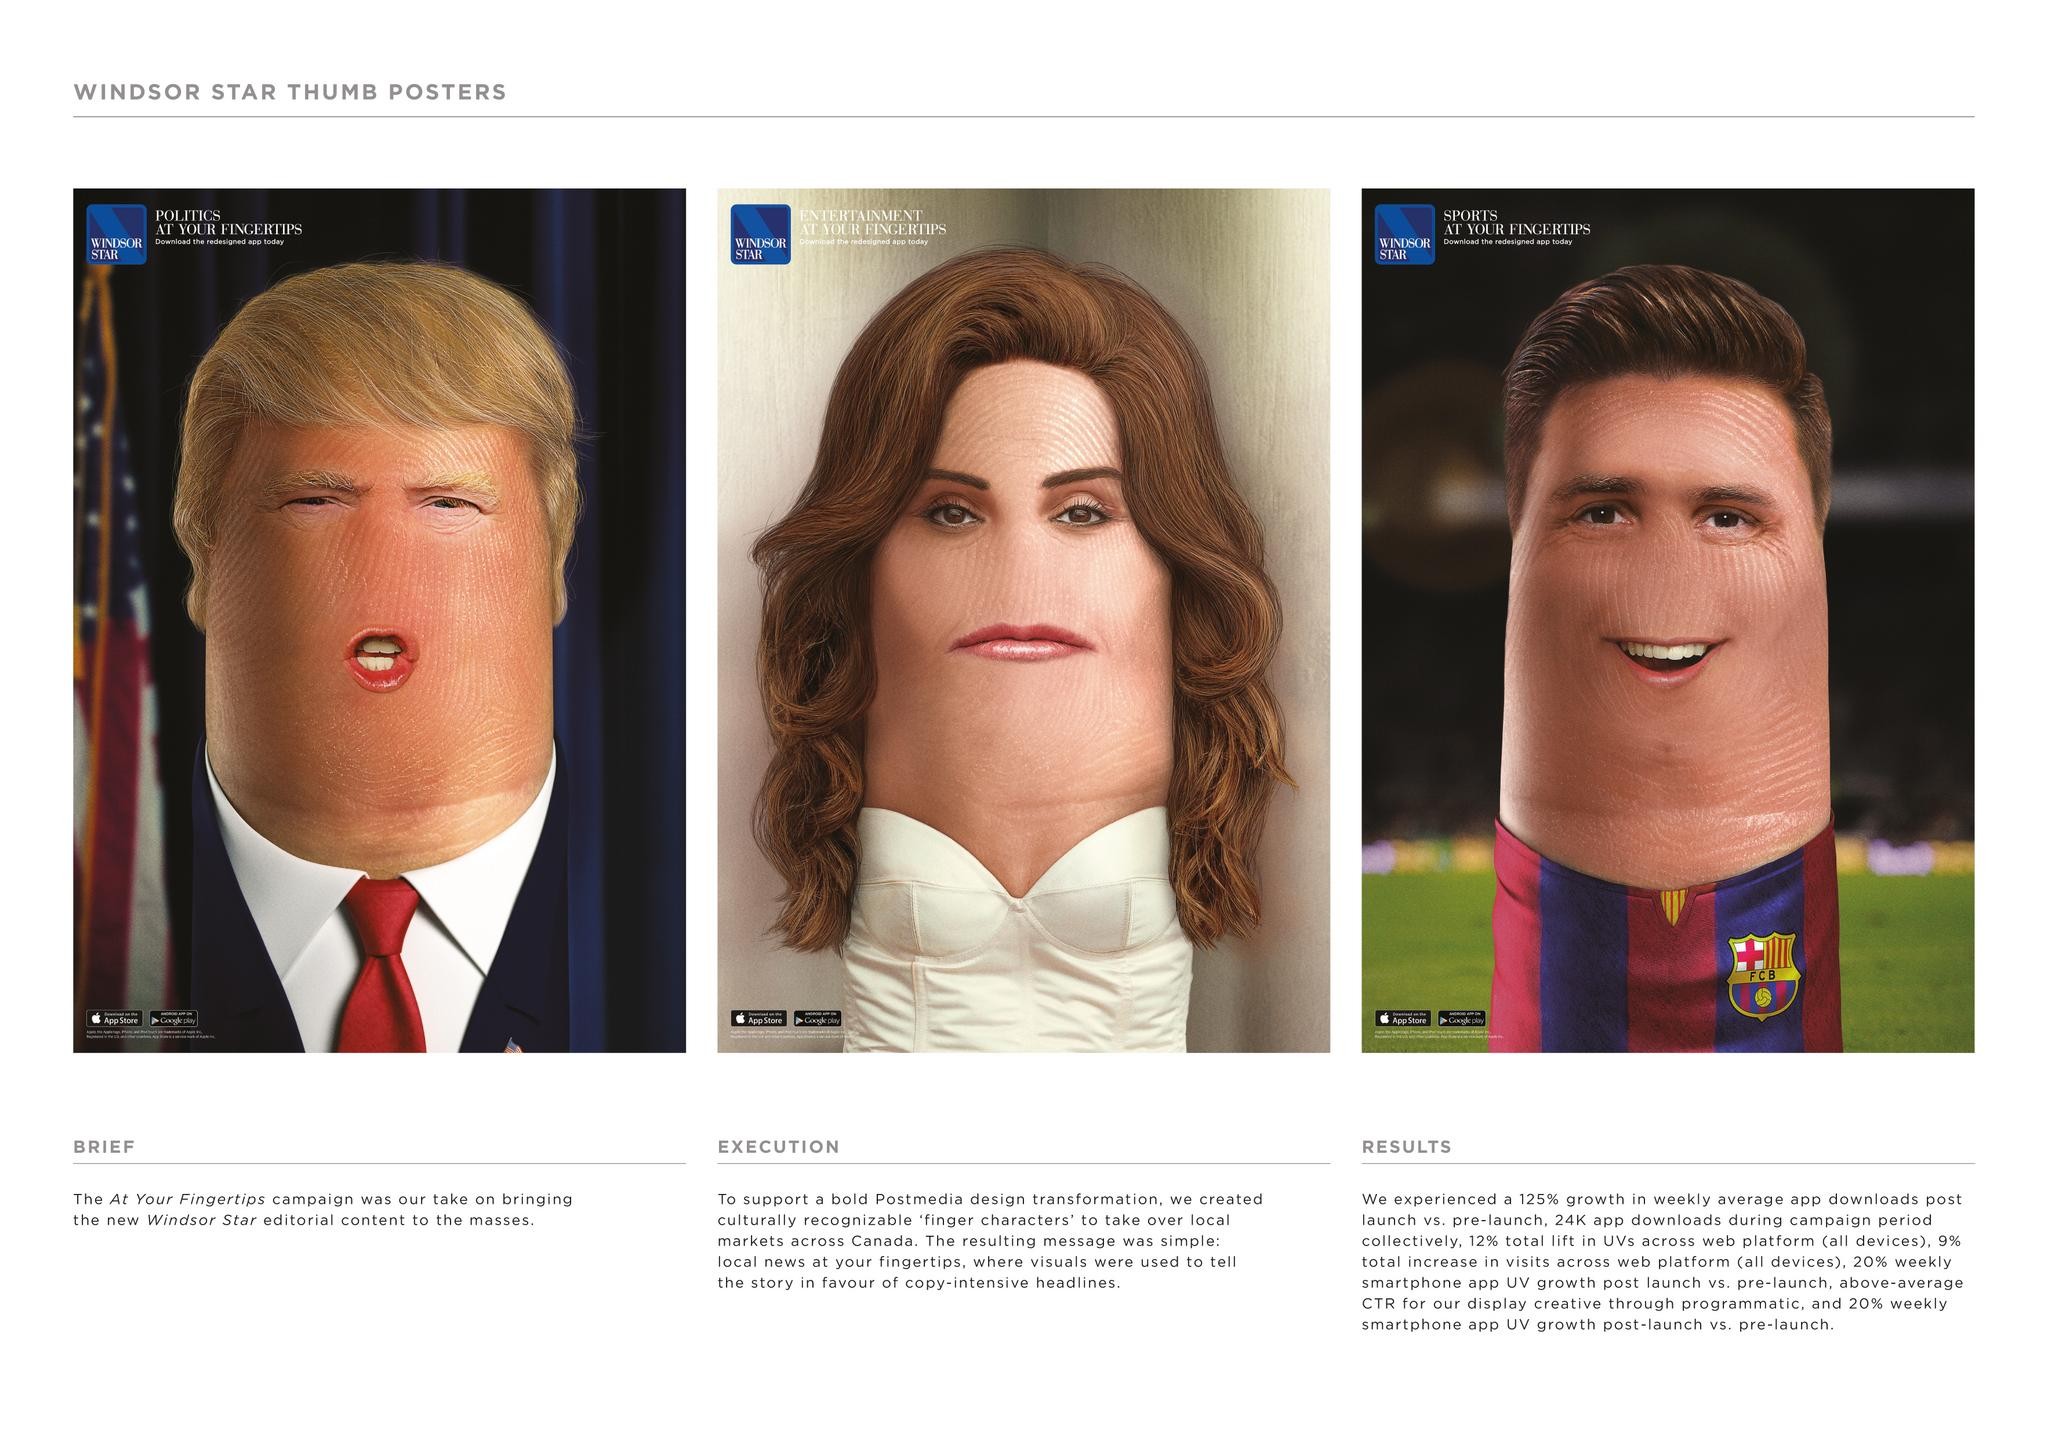 At Your Fingertips ("Trump", "Jenner", "Messi")